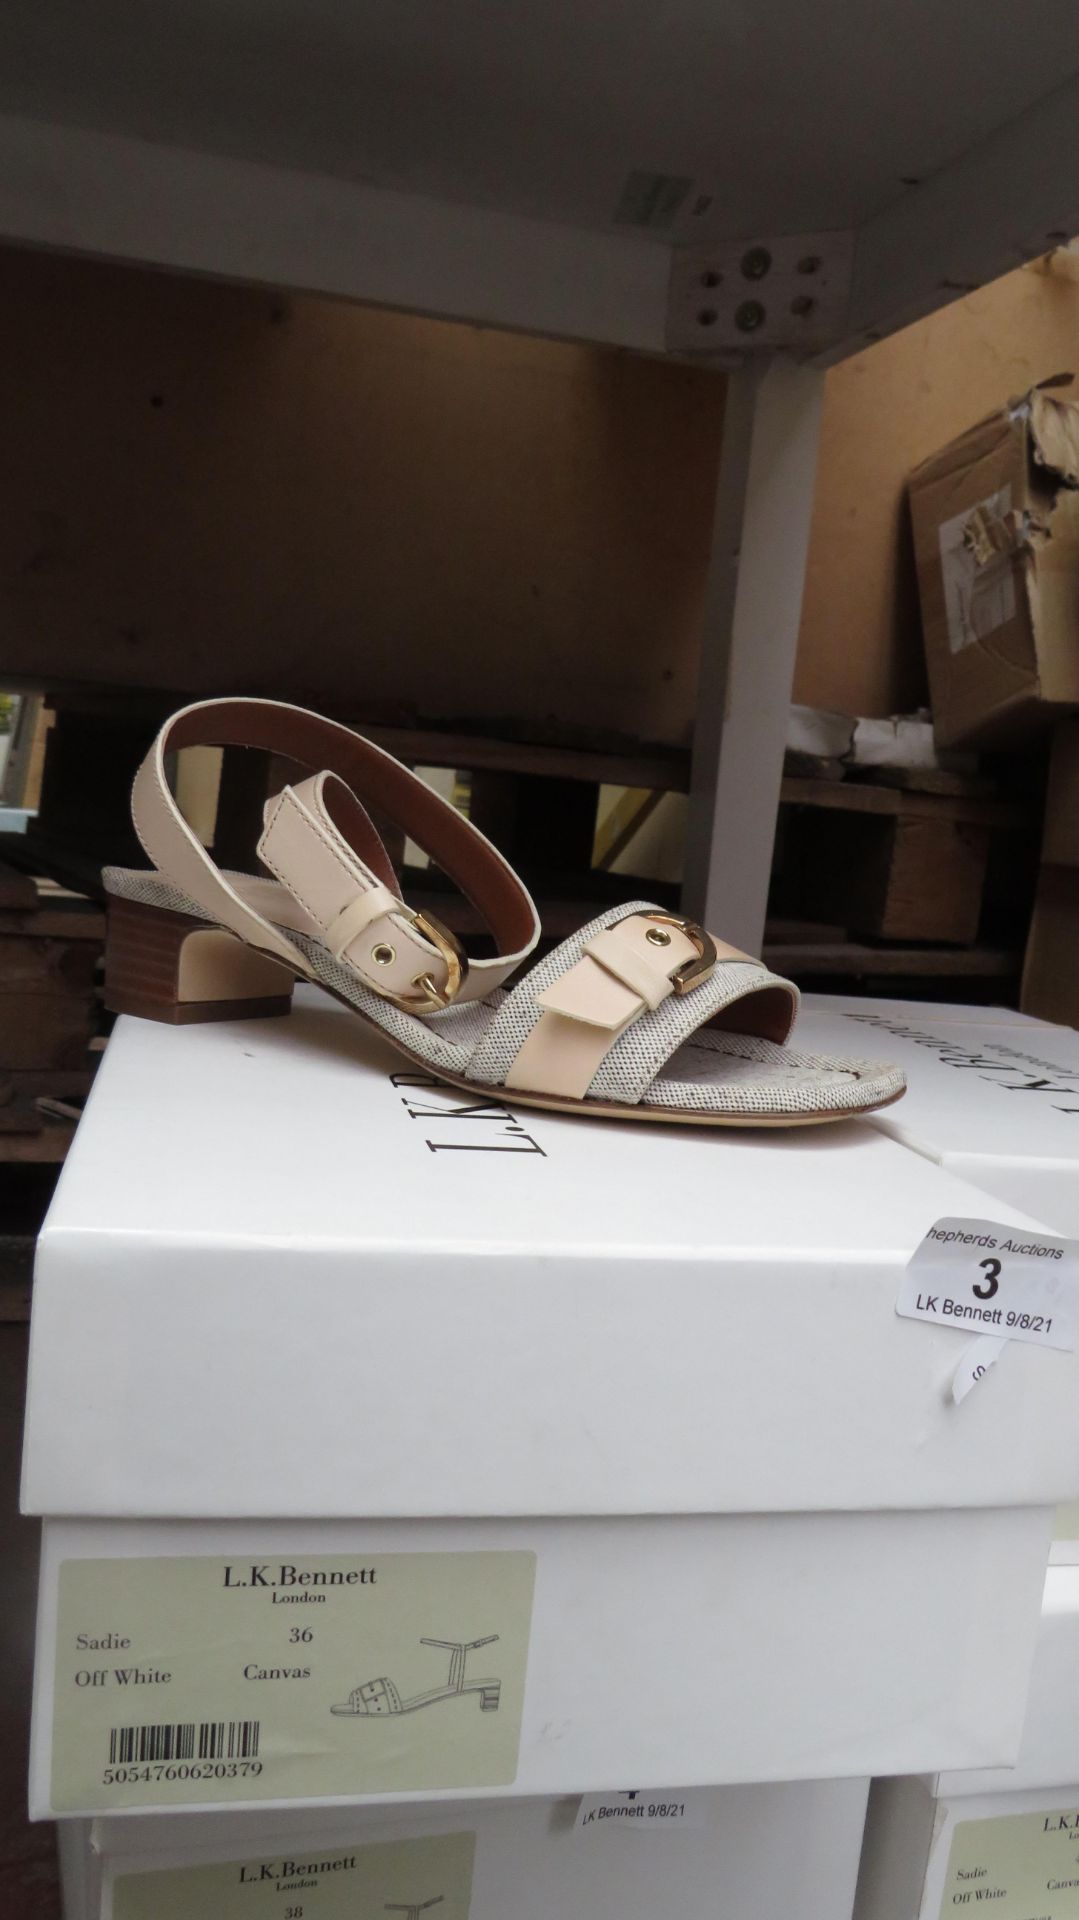 L K Bennett London Sadie Off White Canvas Sandals size 39 RRP £195 new & boxed see image for design